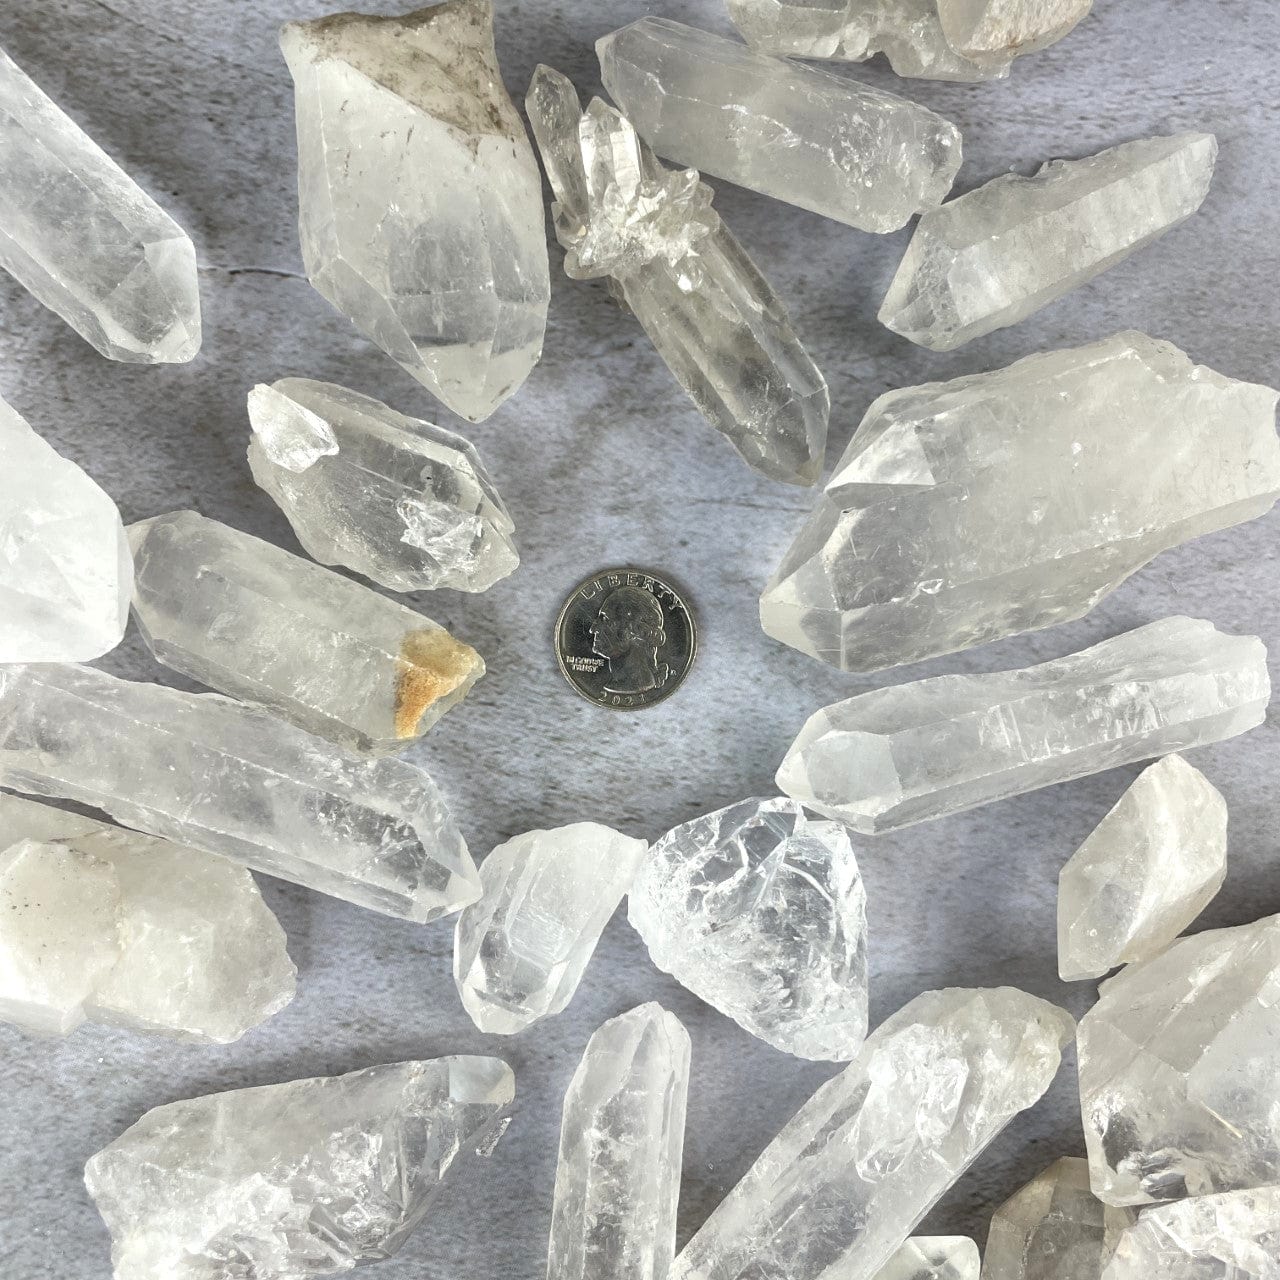 Crystal Quartz Points of assorted sizes around a quarter for size reference